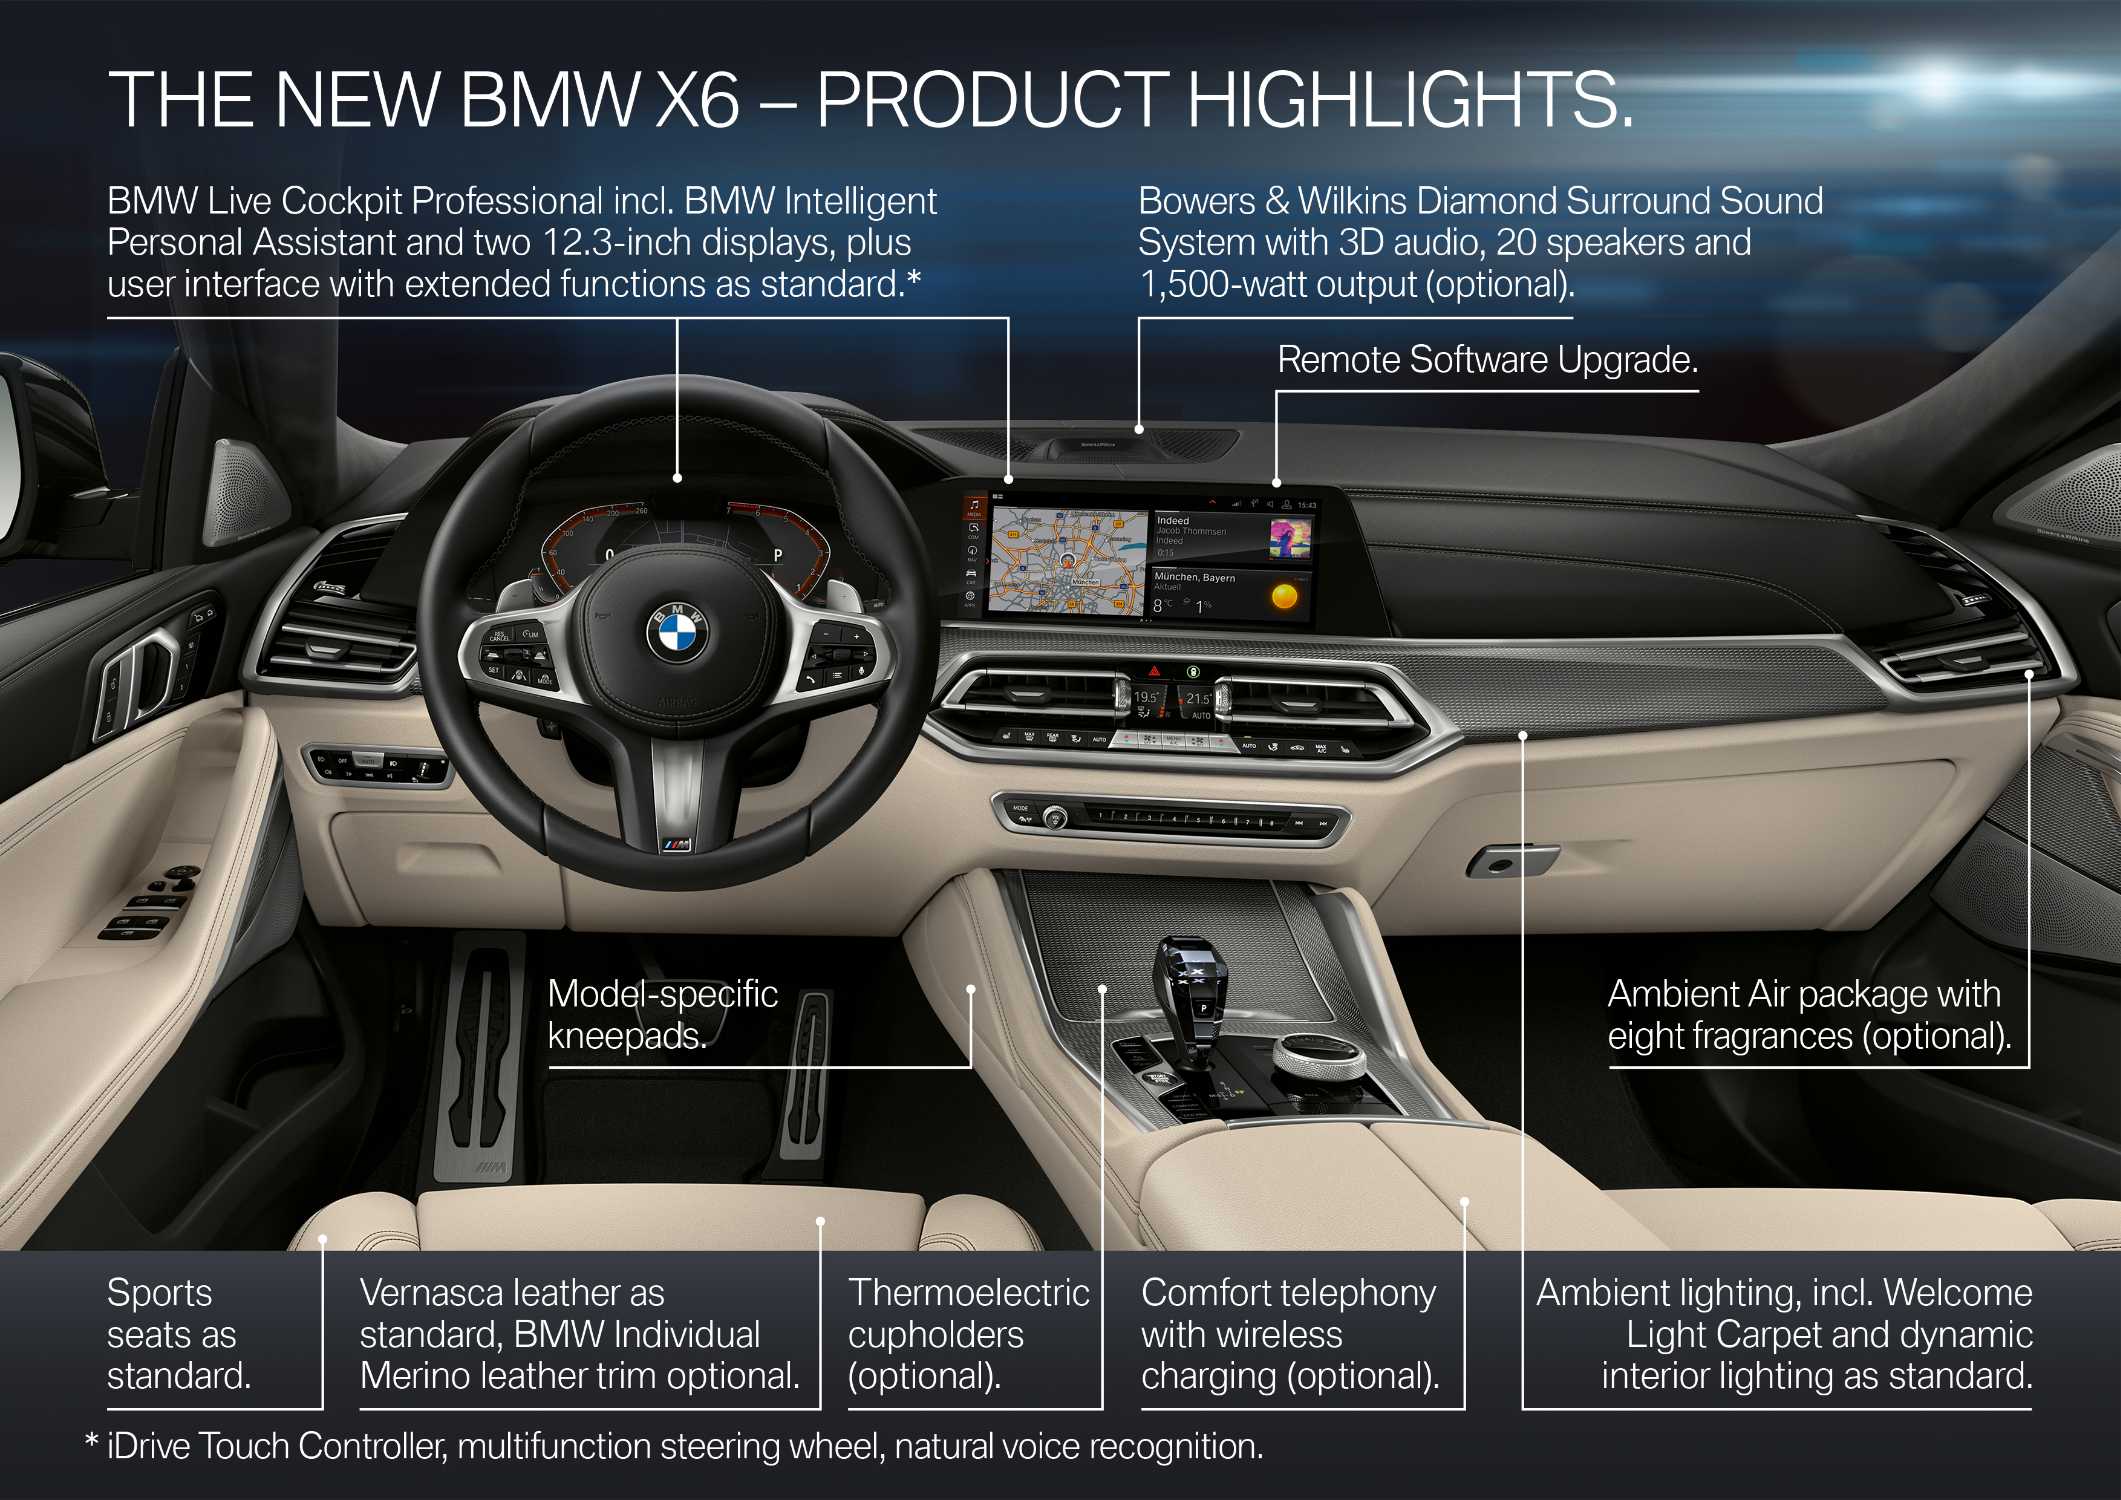 The all-new BMW X6 – Highlights (07/2019).